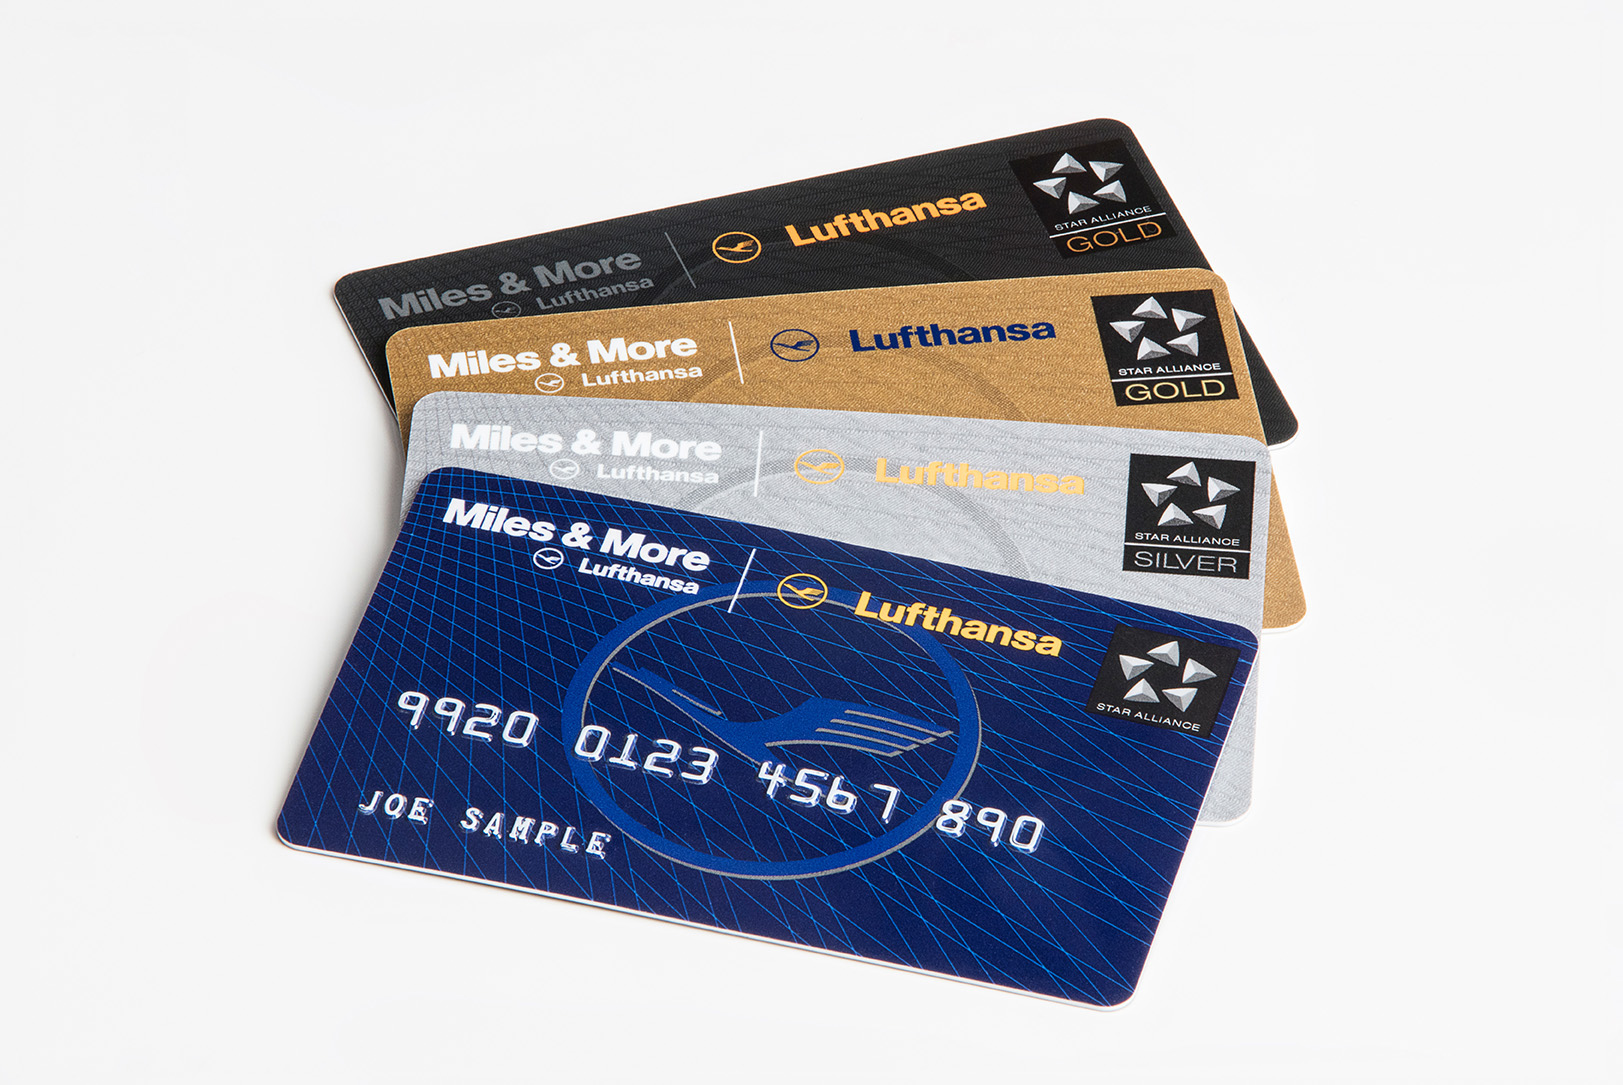 Sell your lufthansa miles & more for cash | redeem lufthansa miles - mileagespot